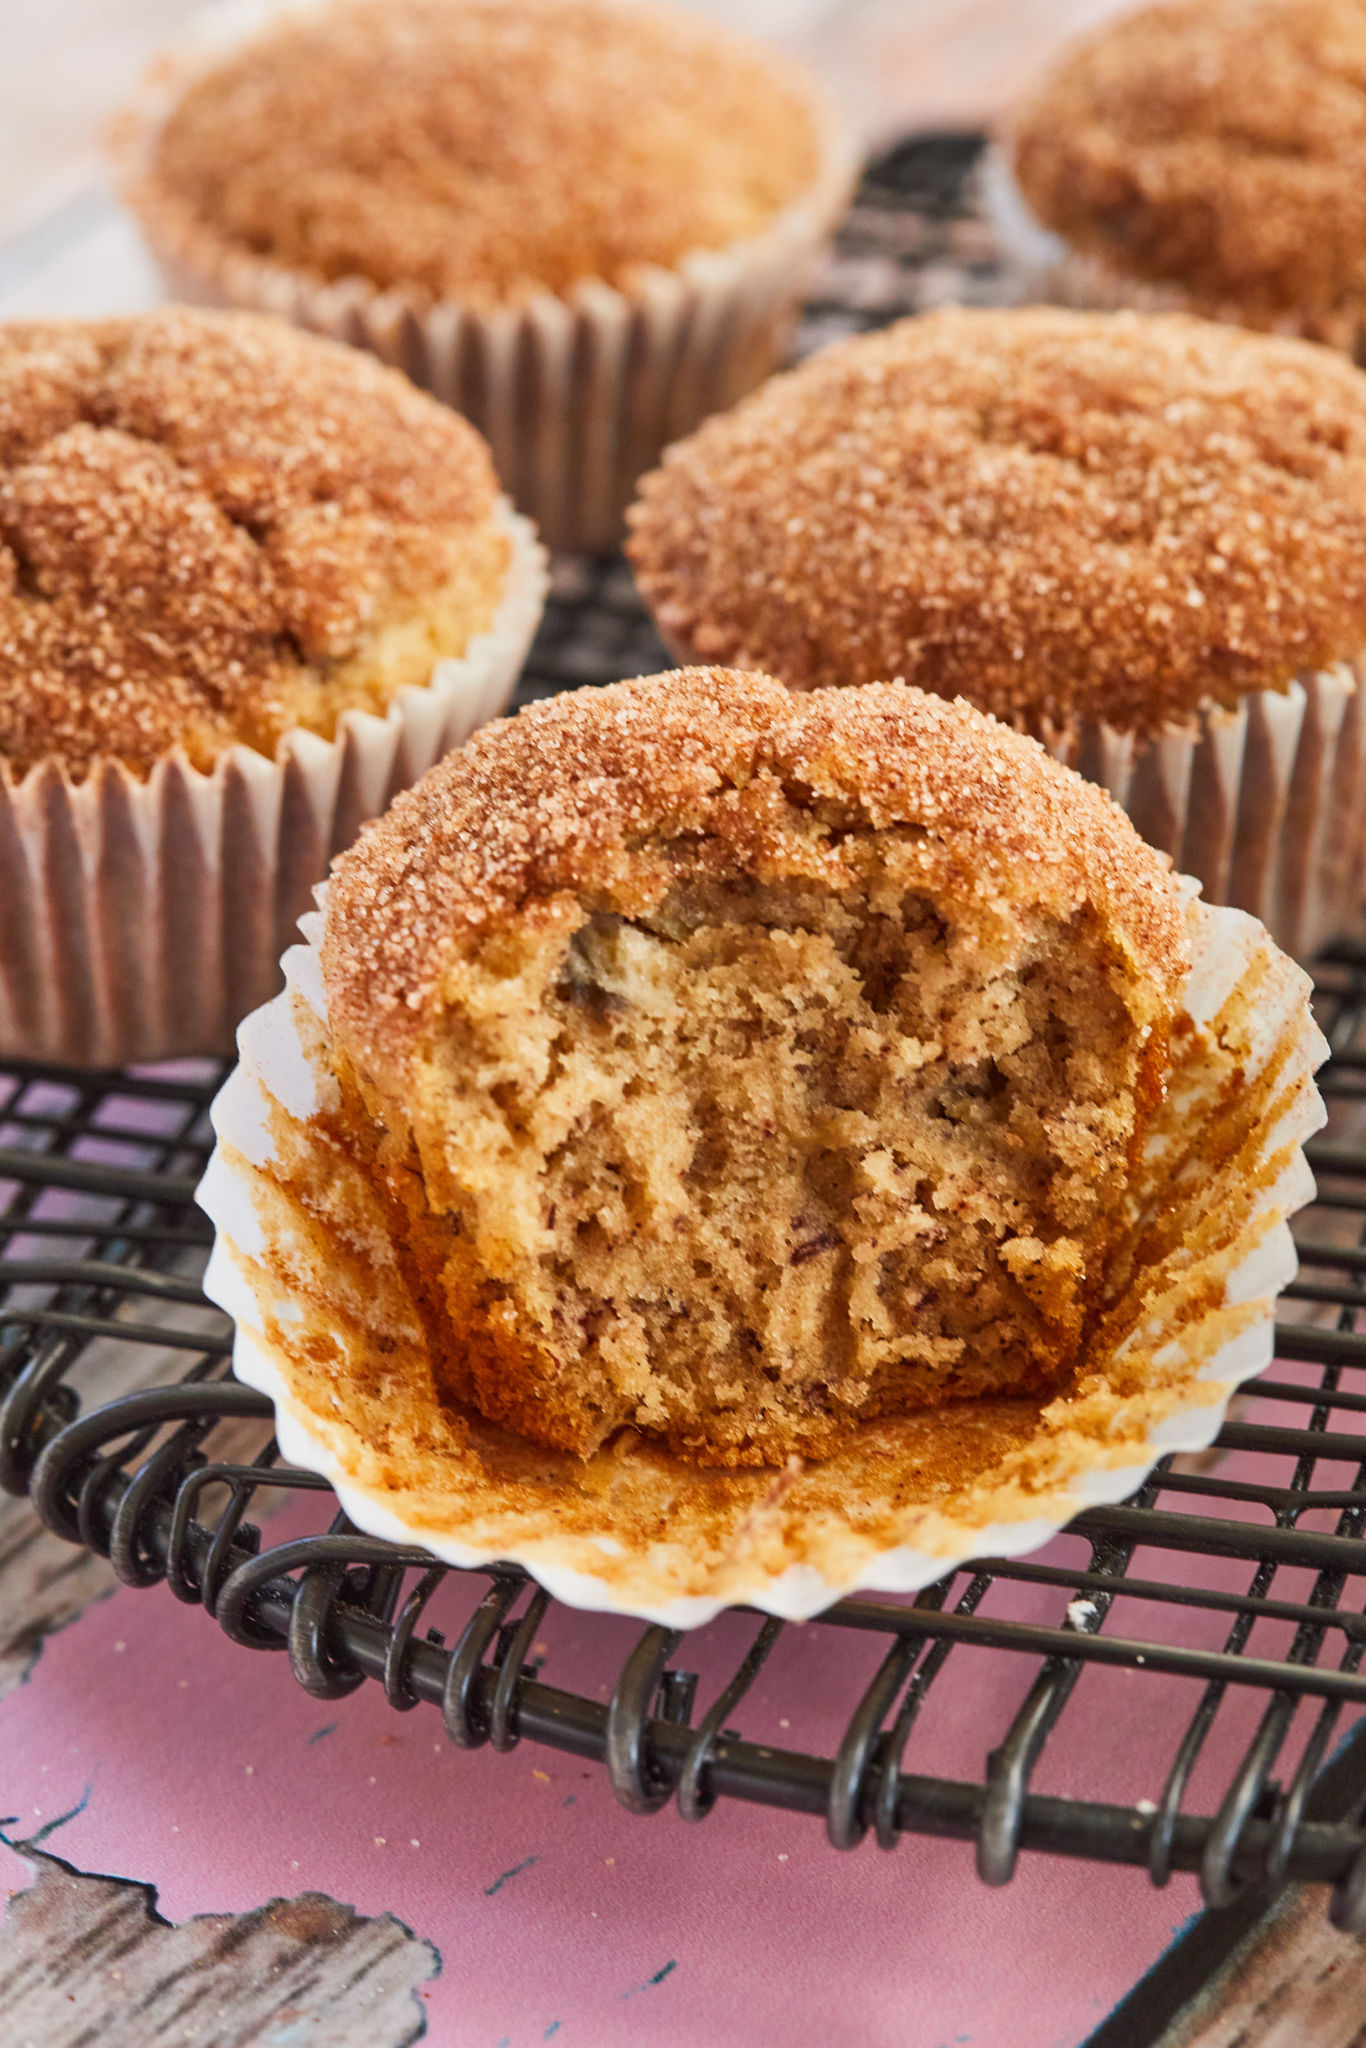 A close up of the interior of my banana bread muffins, to show texture and consistency.